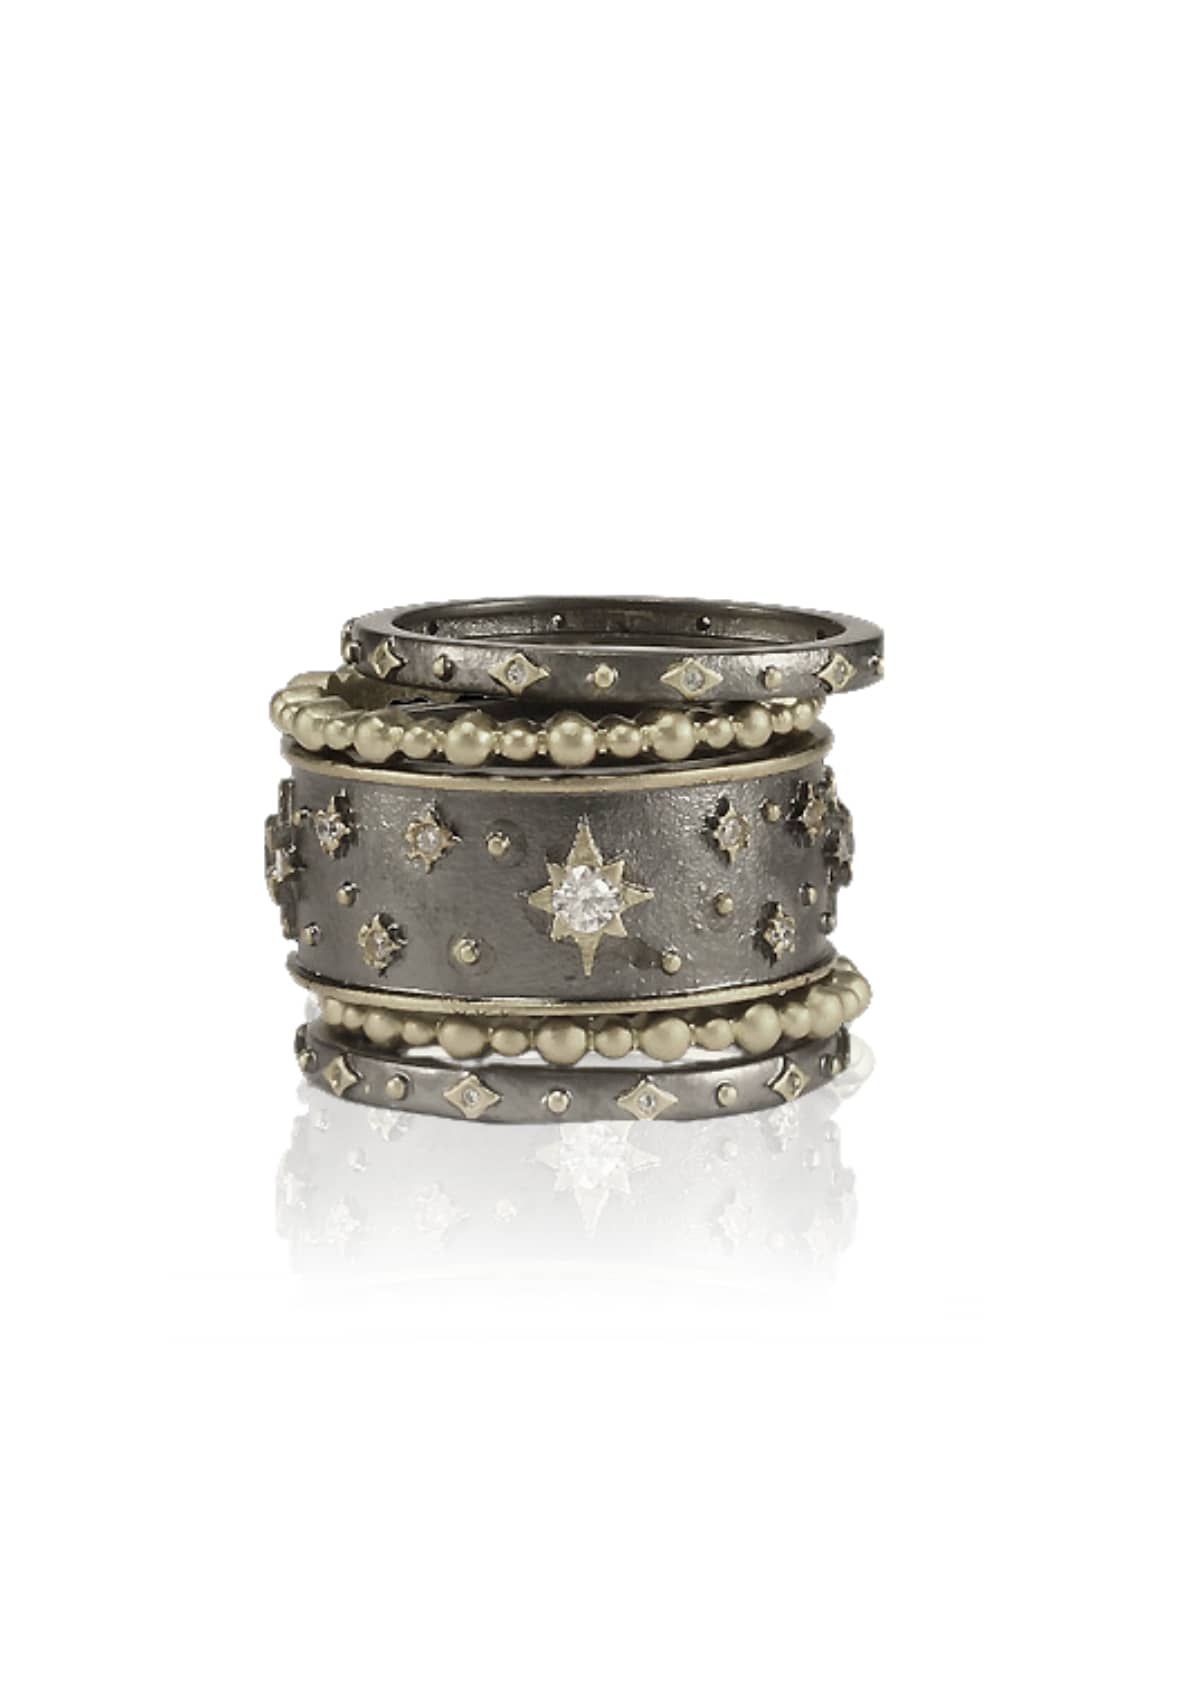 Black/Gold North Star 5-band ring -Be-Je Designs- Ruby Jane-